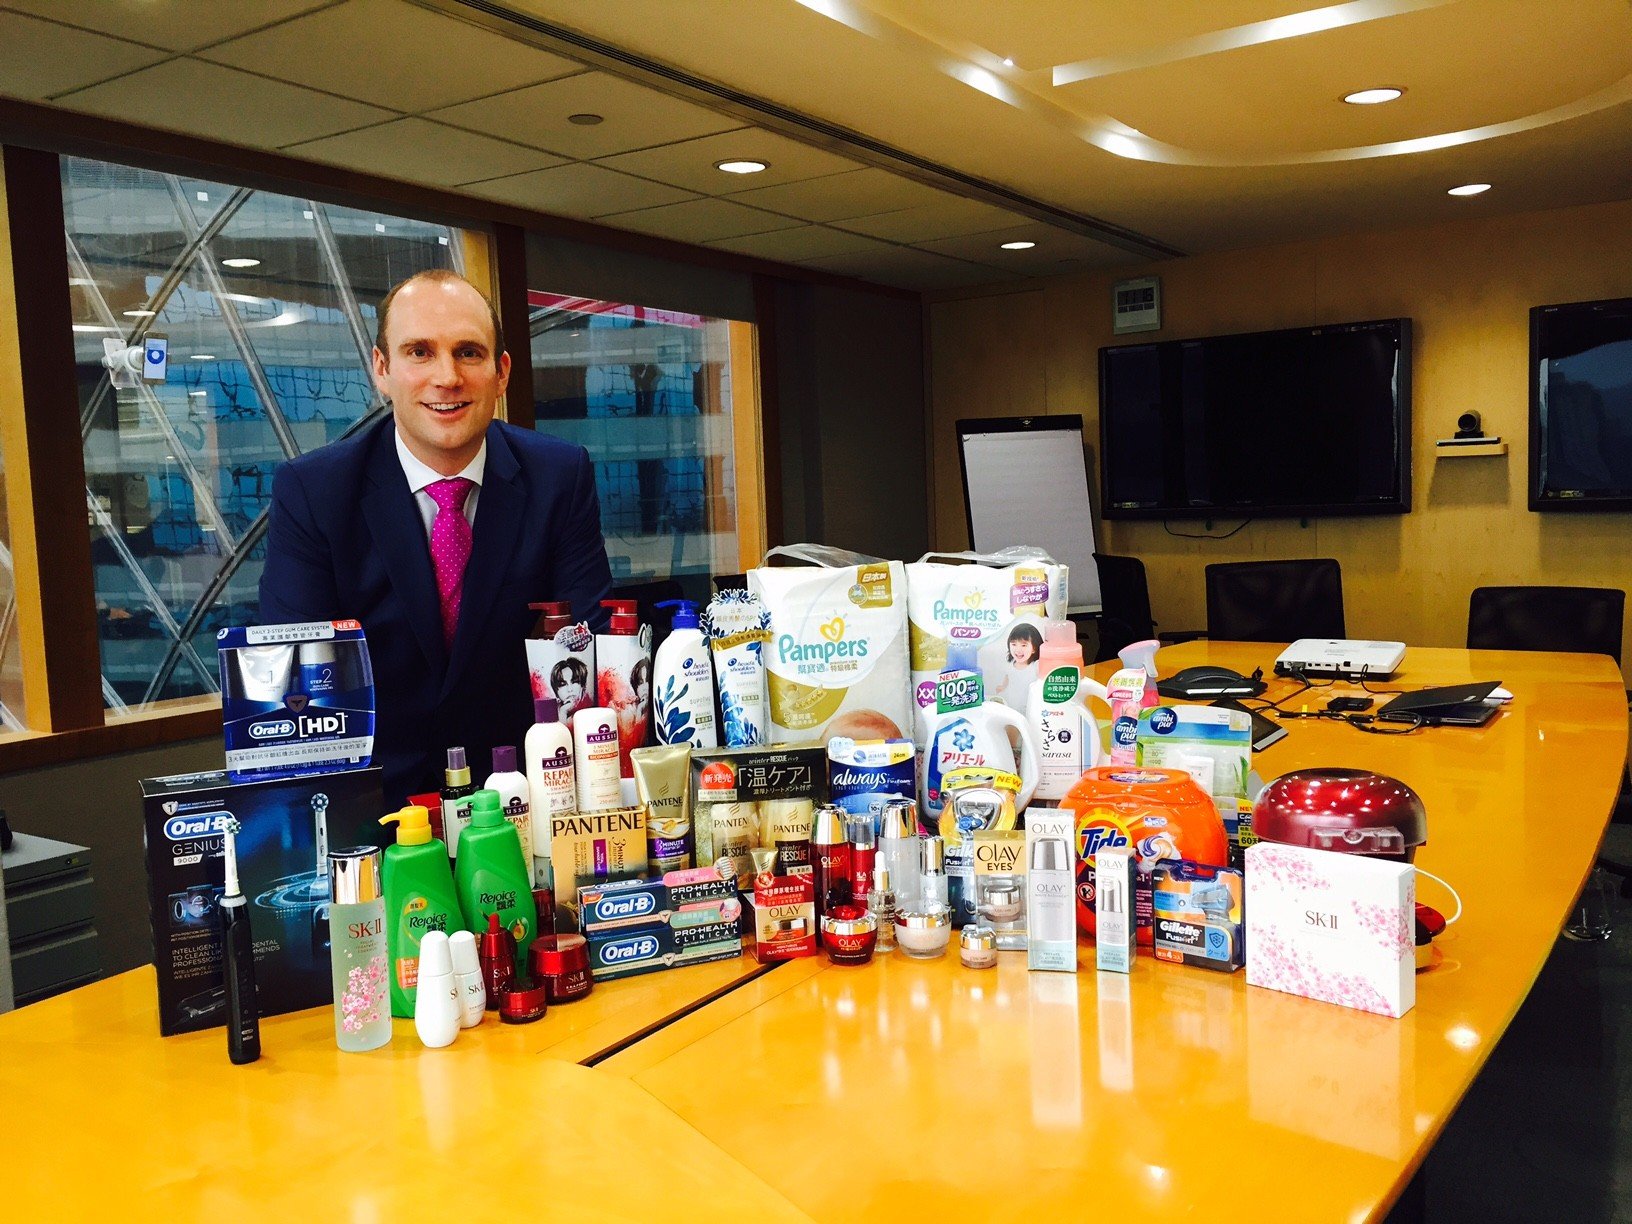 Michael Yates, general manager Hong Kong & Taiwan at Procter & Gamble, says most of the products the company brings into Hong Kong are “premium or super premium”. Photo: Celine Ge